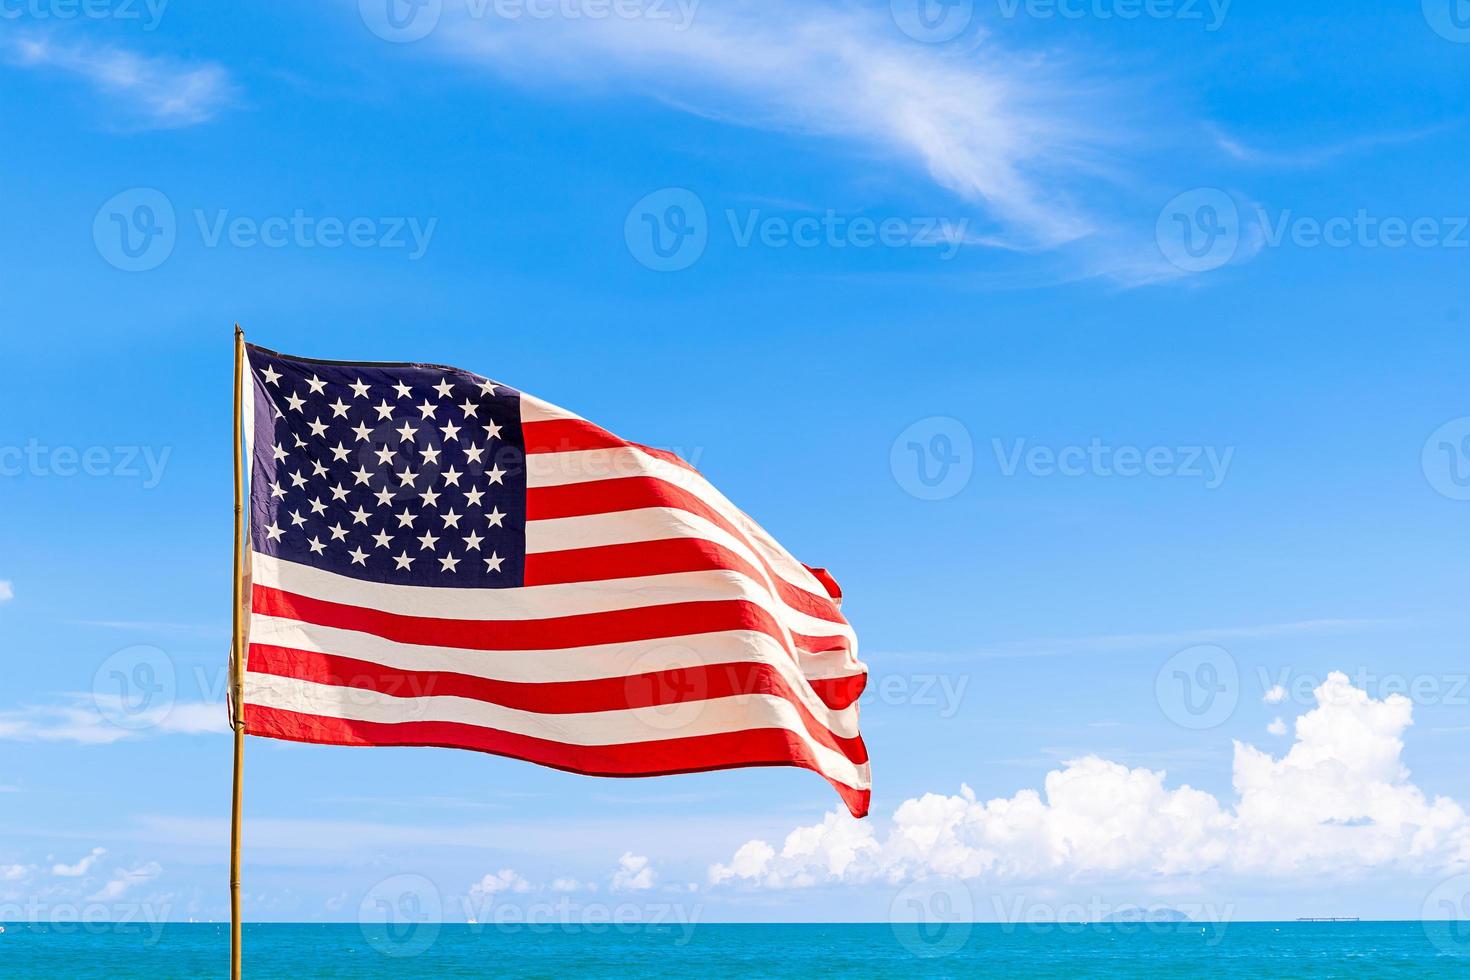 Flag of United States of America USA waving in the wind photo